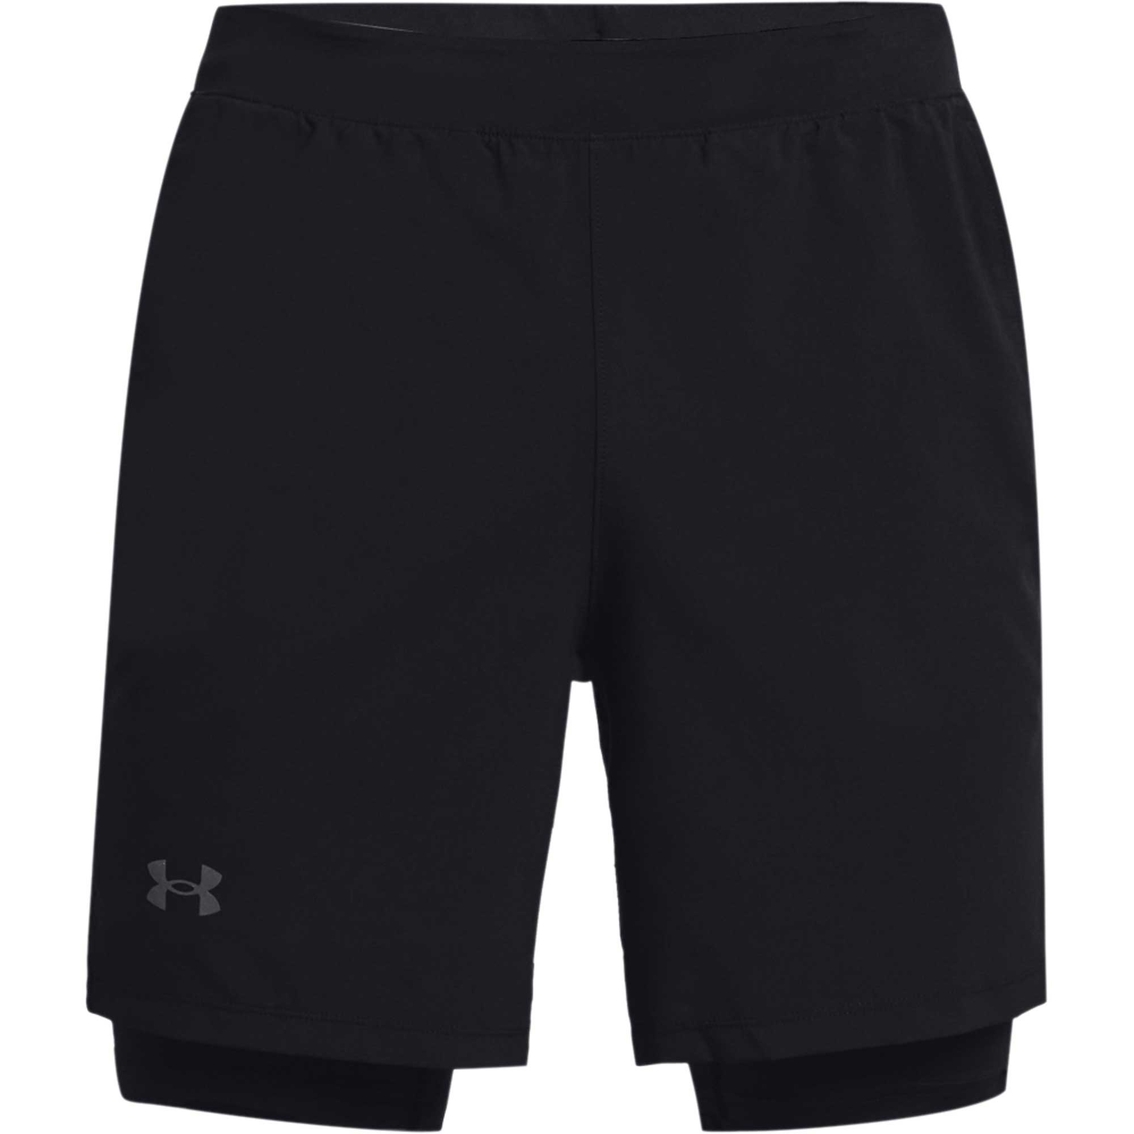 Under Armour Launch Run 2-in-1 Shorts - Image 6 of 7